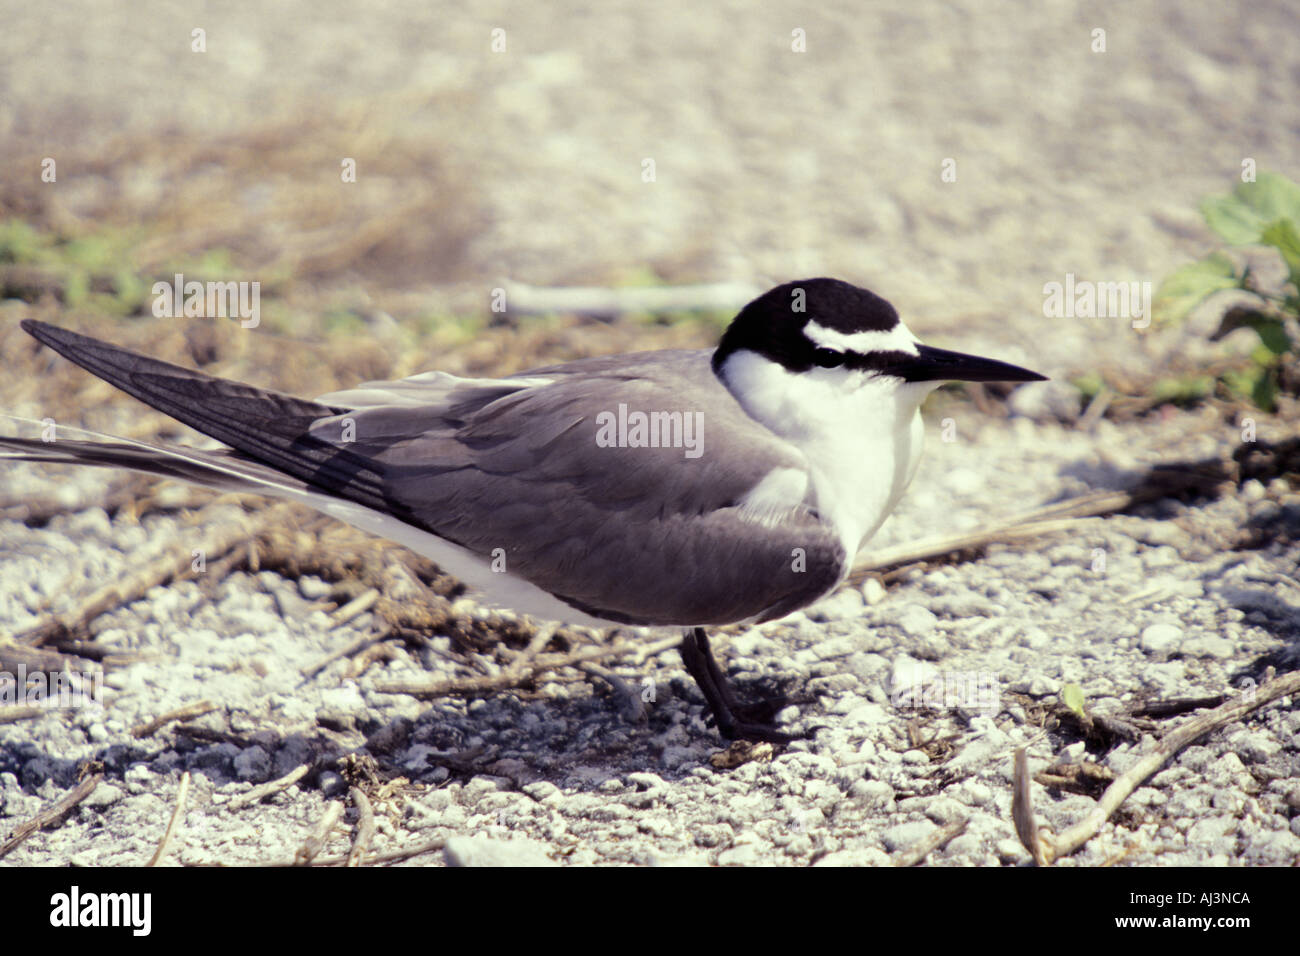 Spectacled Tern Sterna lunata Midway Atoll Stock Photo